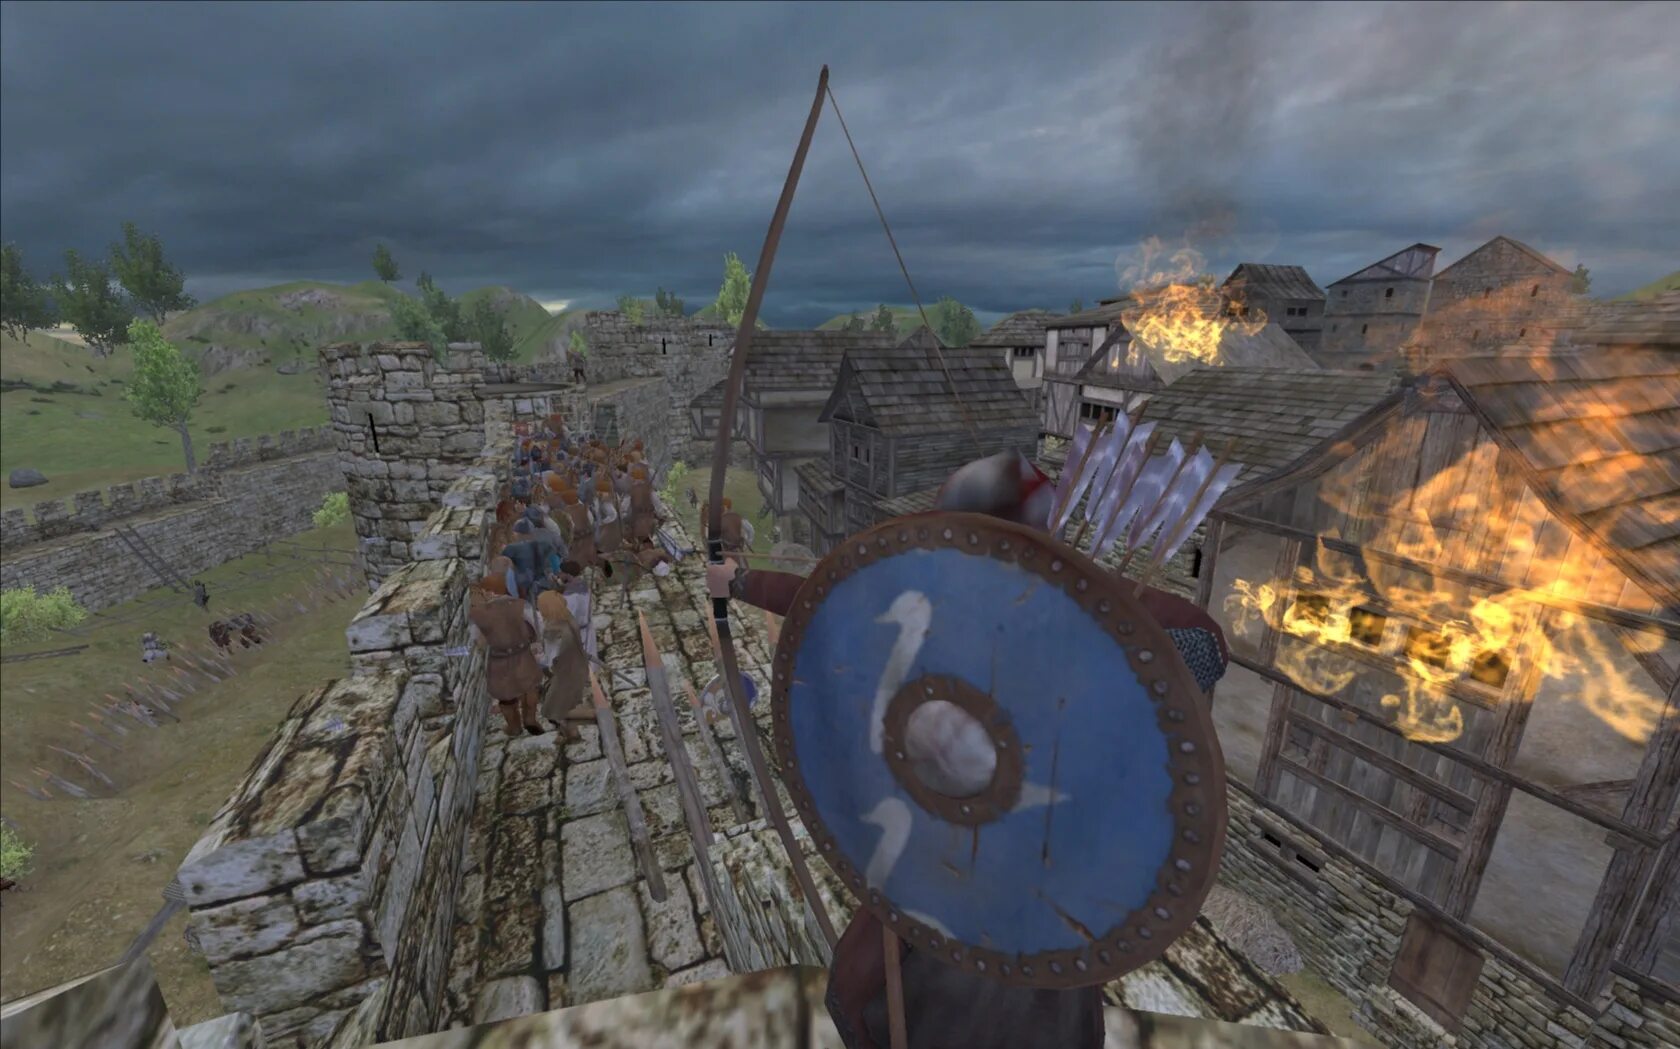 Mount and Blade Warband Осада. Mount and Blade осады. Mount and Blade Осада замка. Mount and Blade осады требушеты.